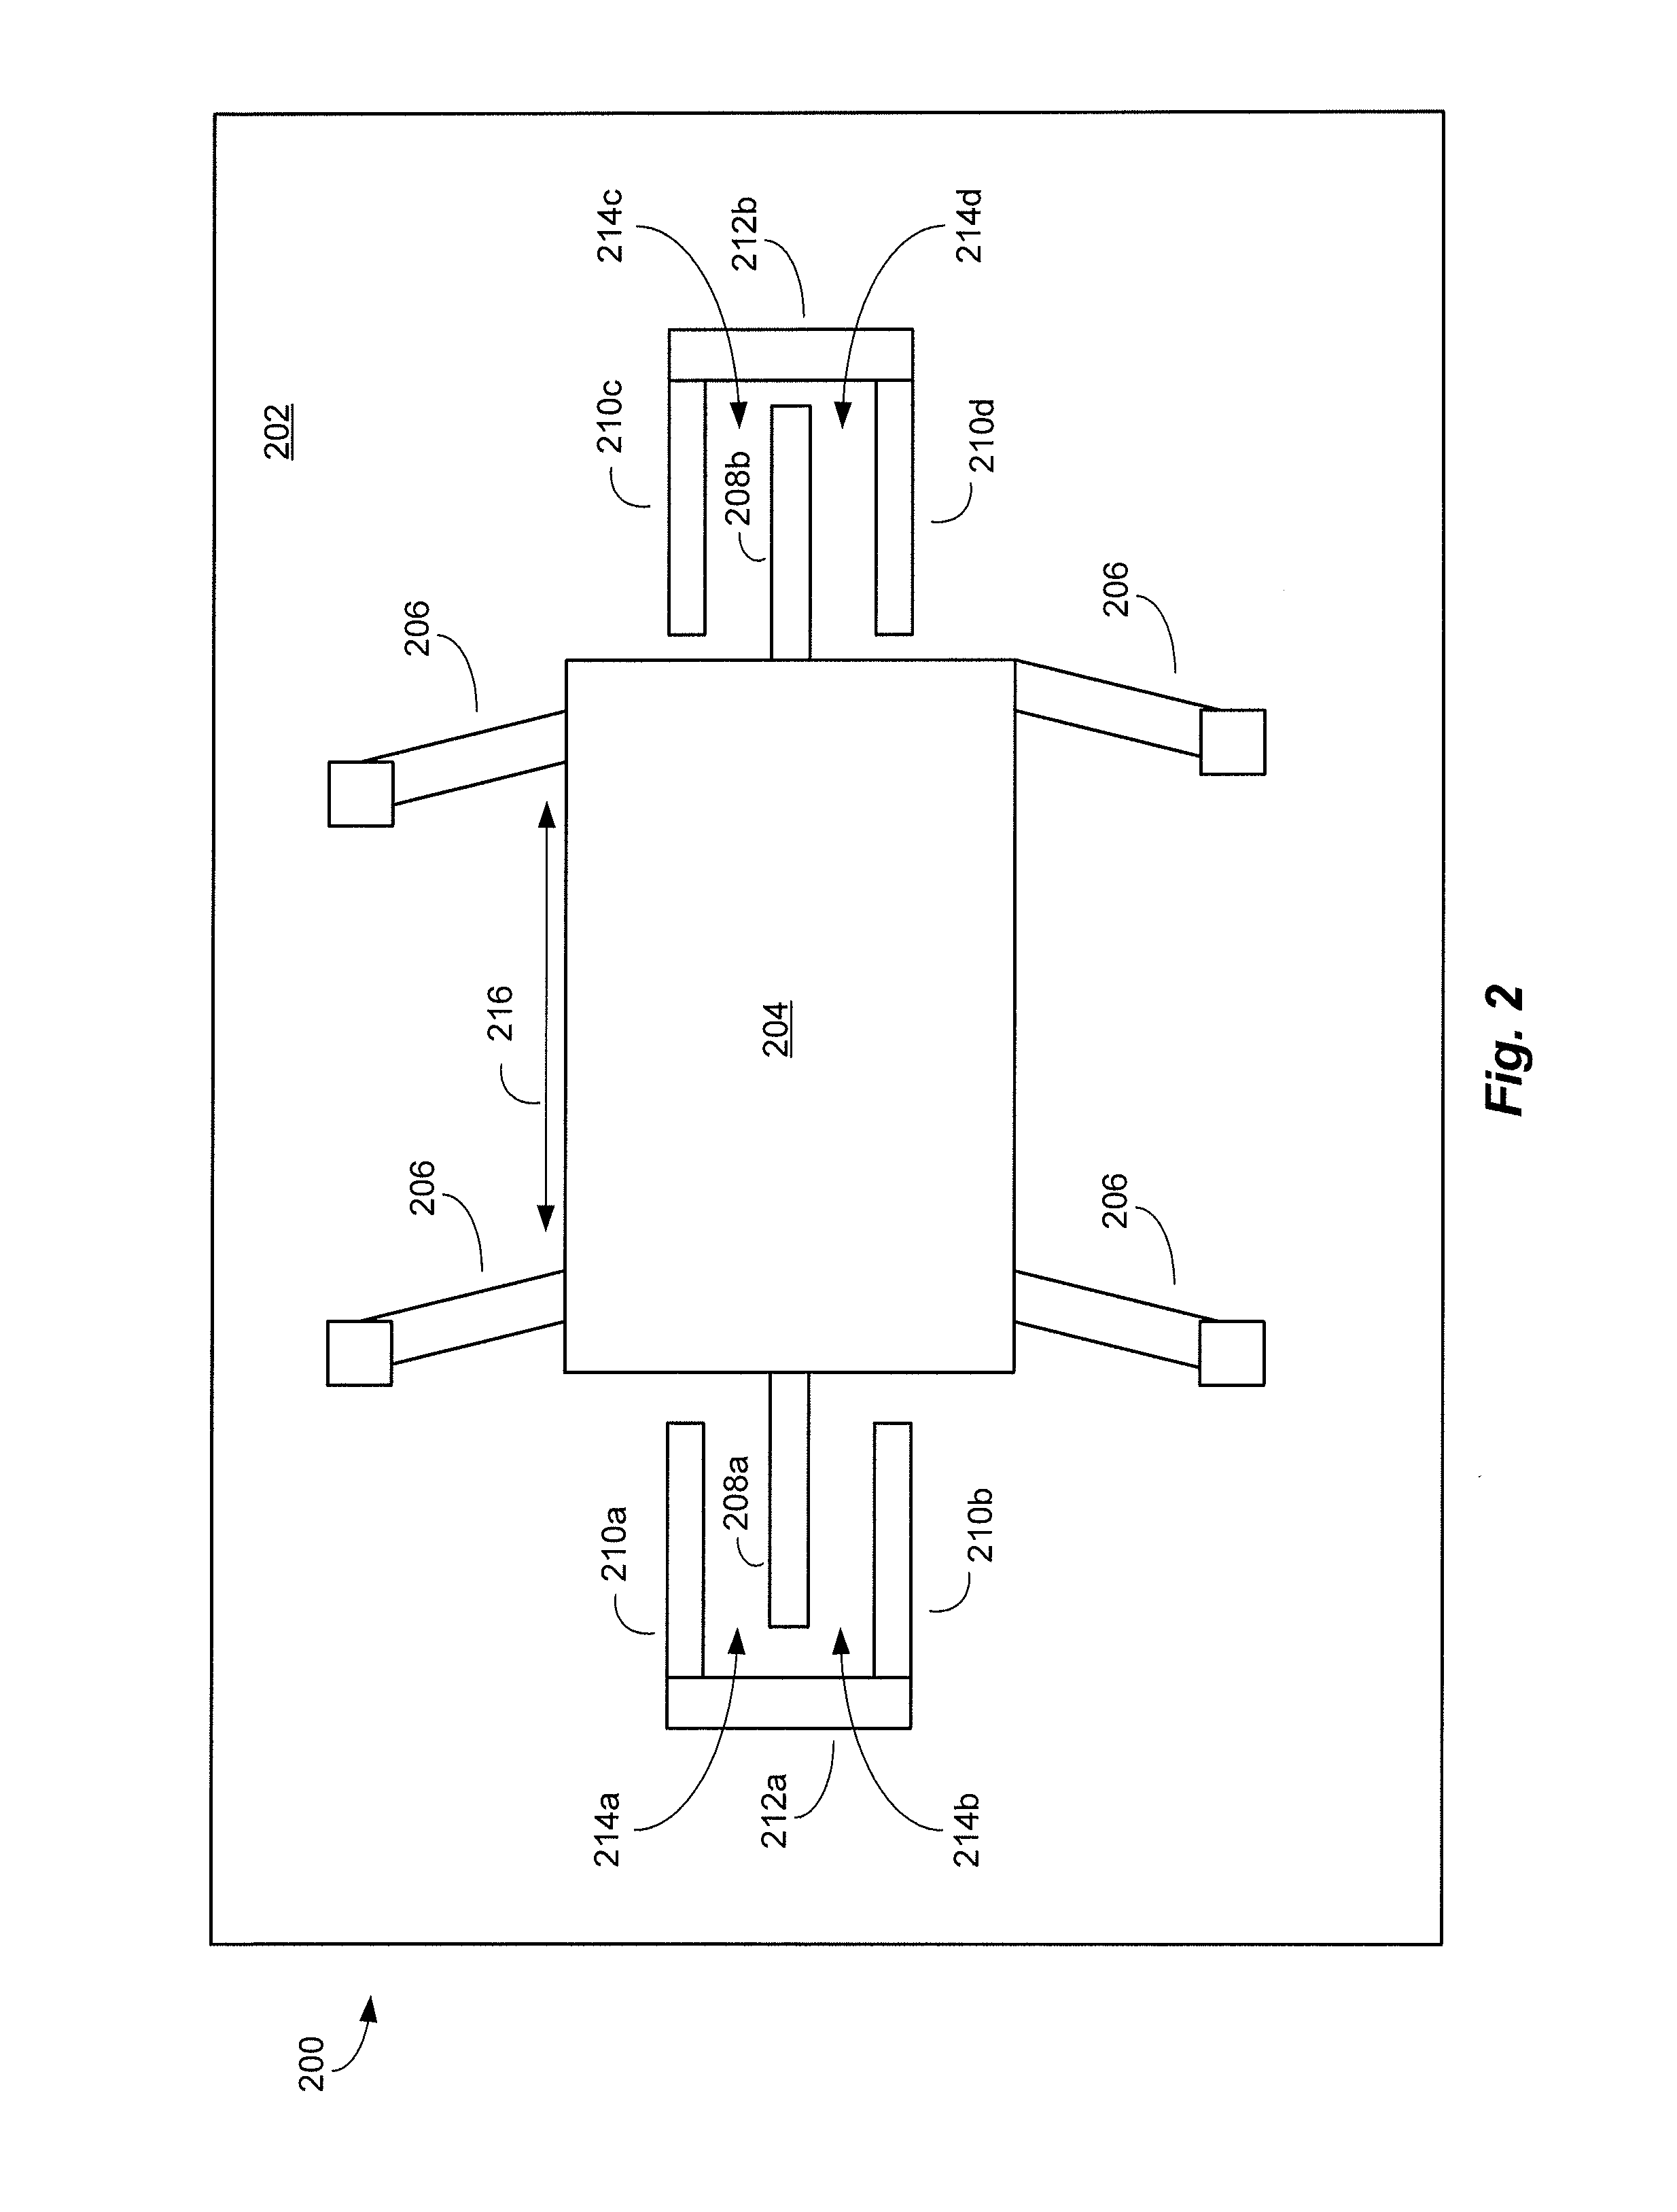 Highly sensitive capacitive sensor and methods of manufacturing the same